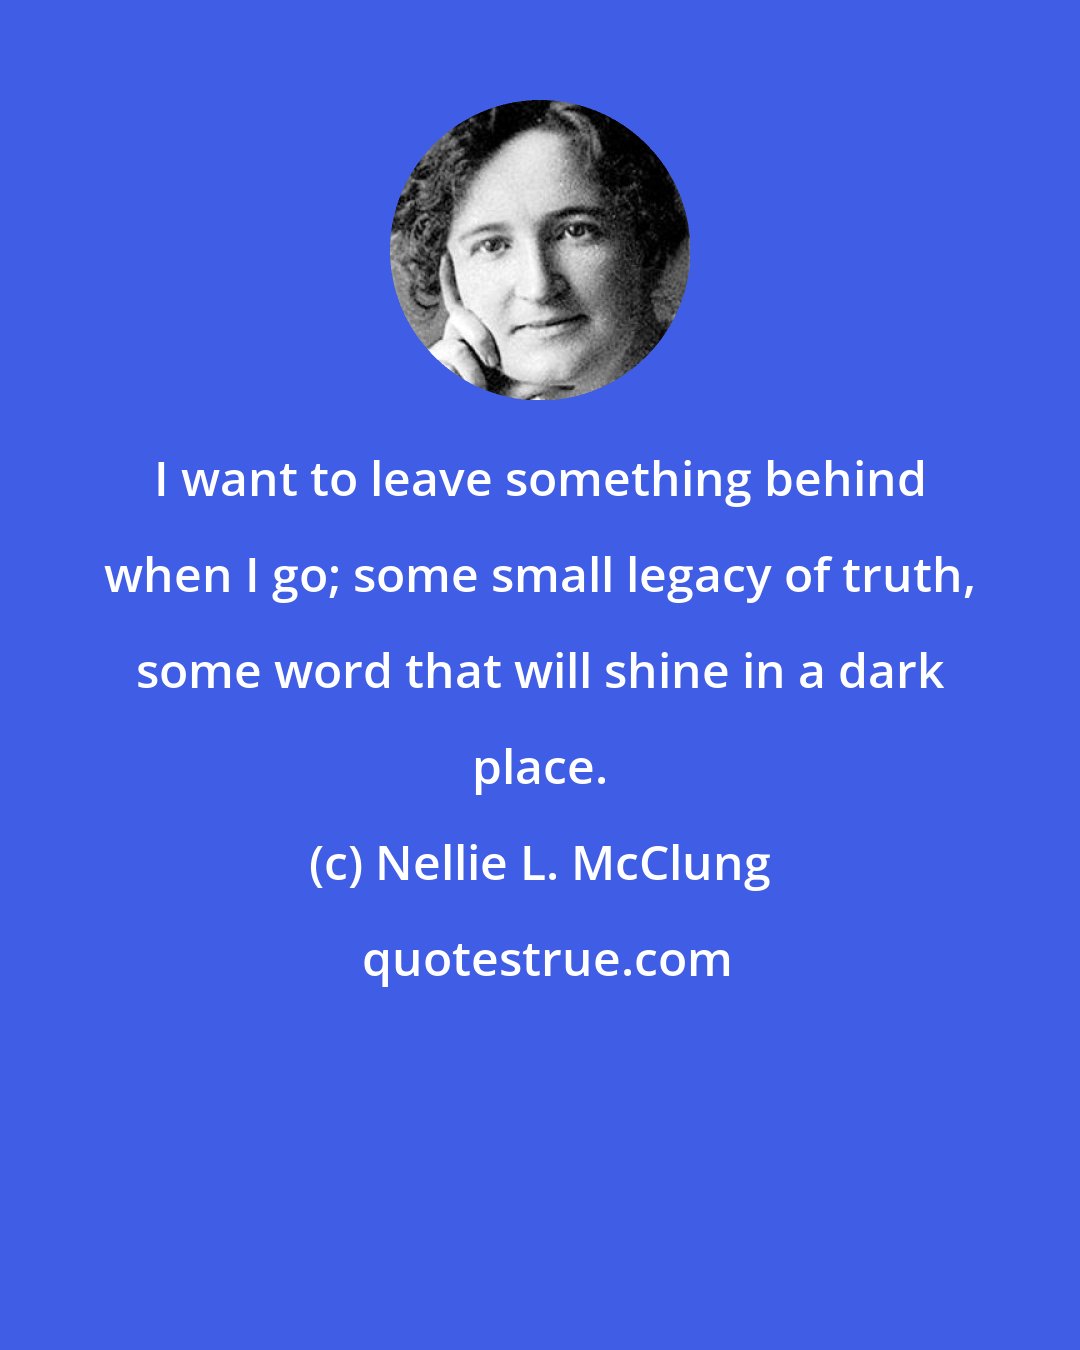 Nellie L. McClung: I want to leave something behind when I go; some small legacy of truth, some word that will shine in a dark place.